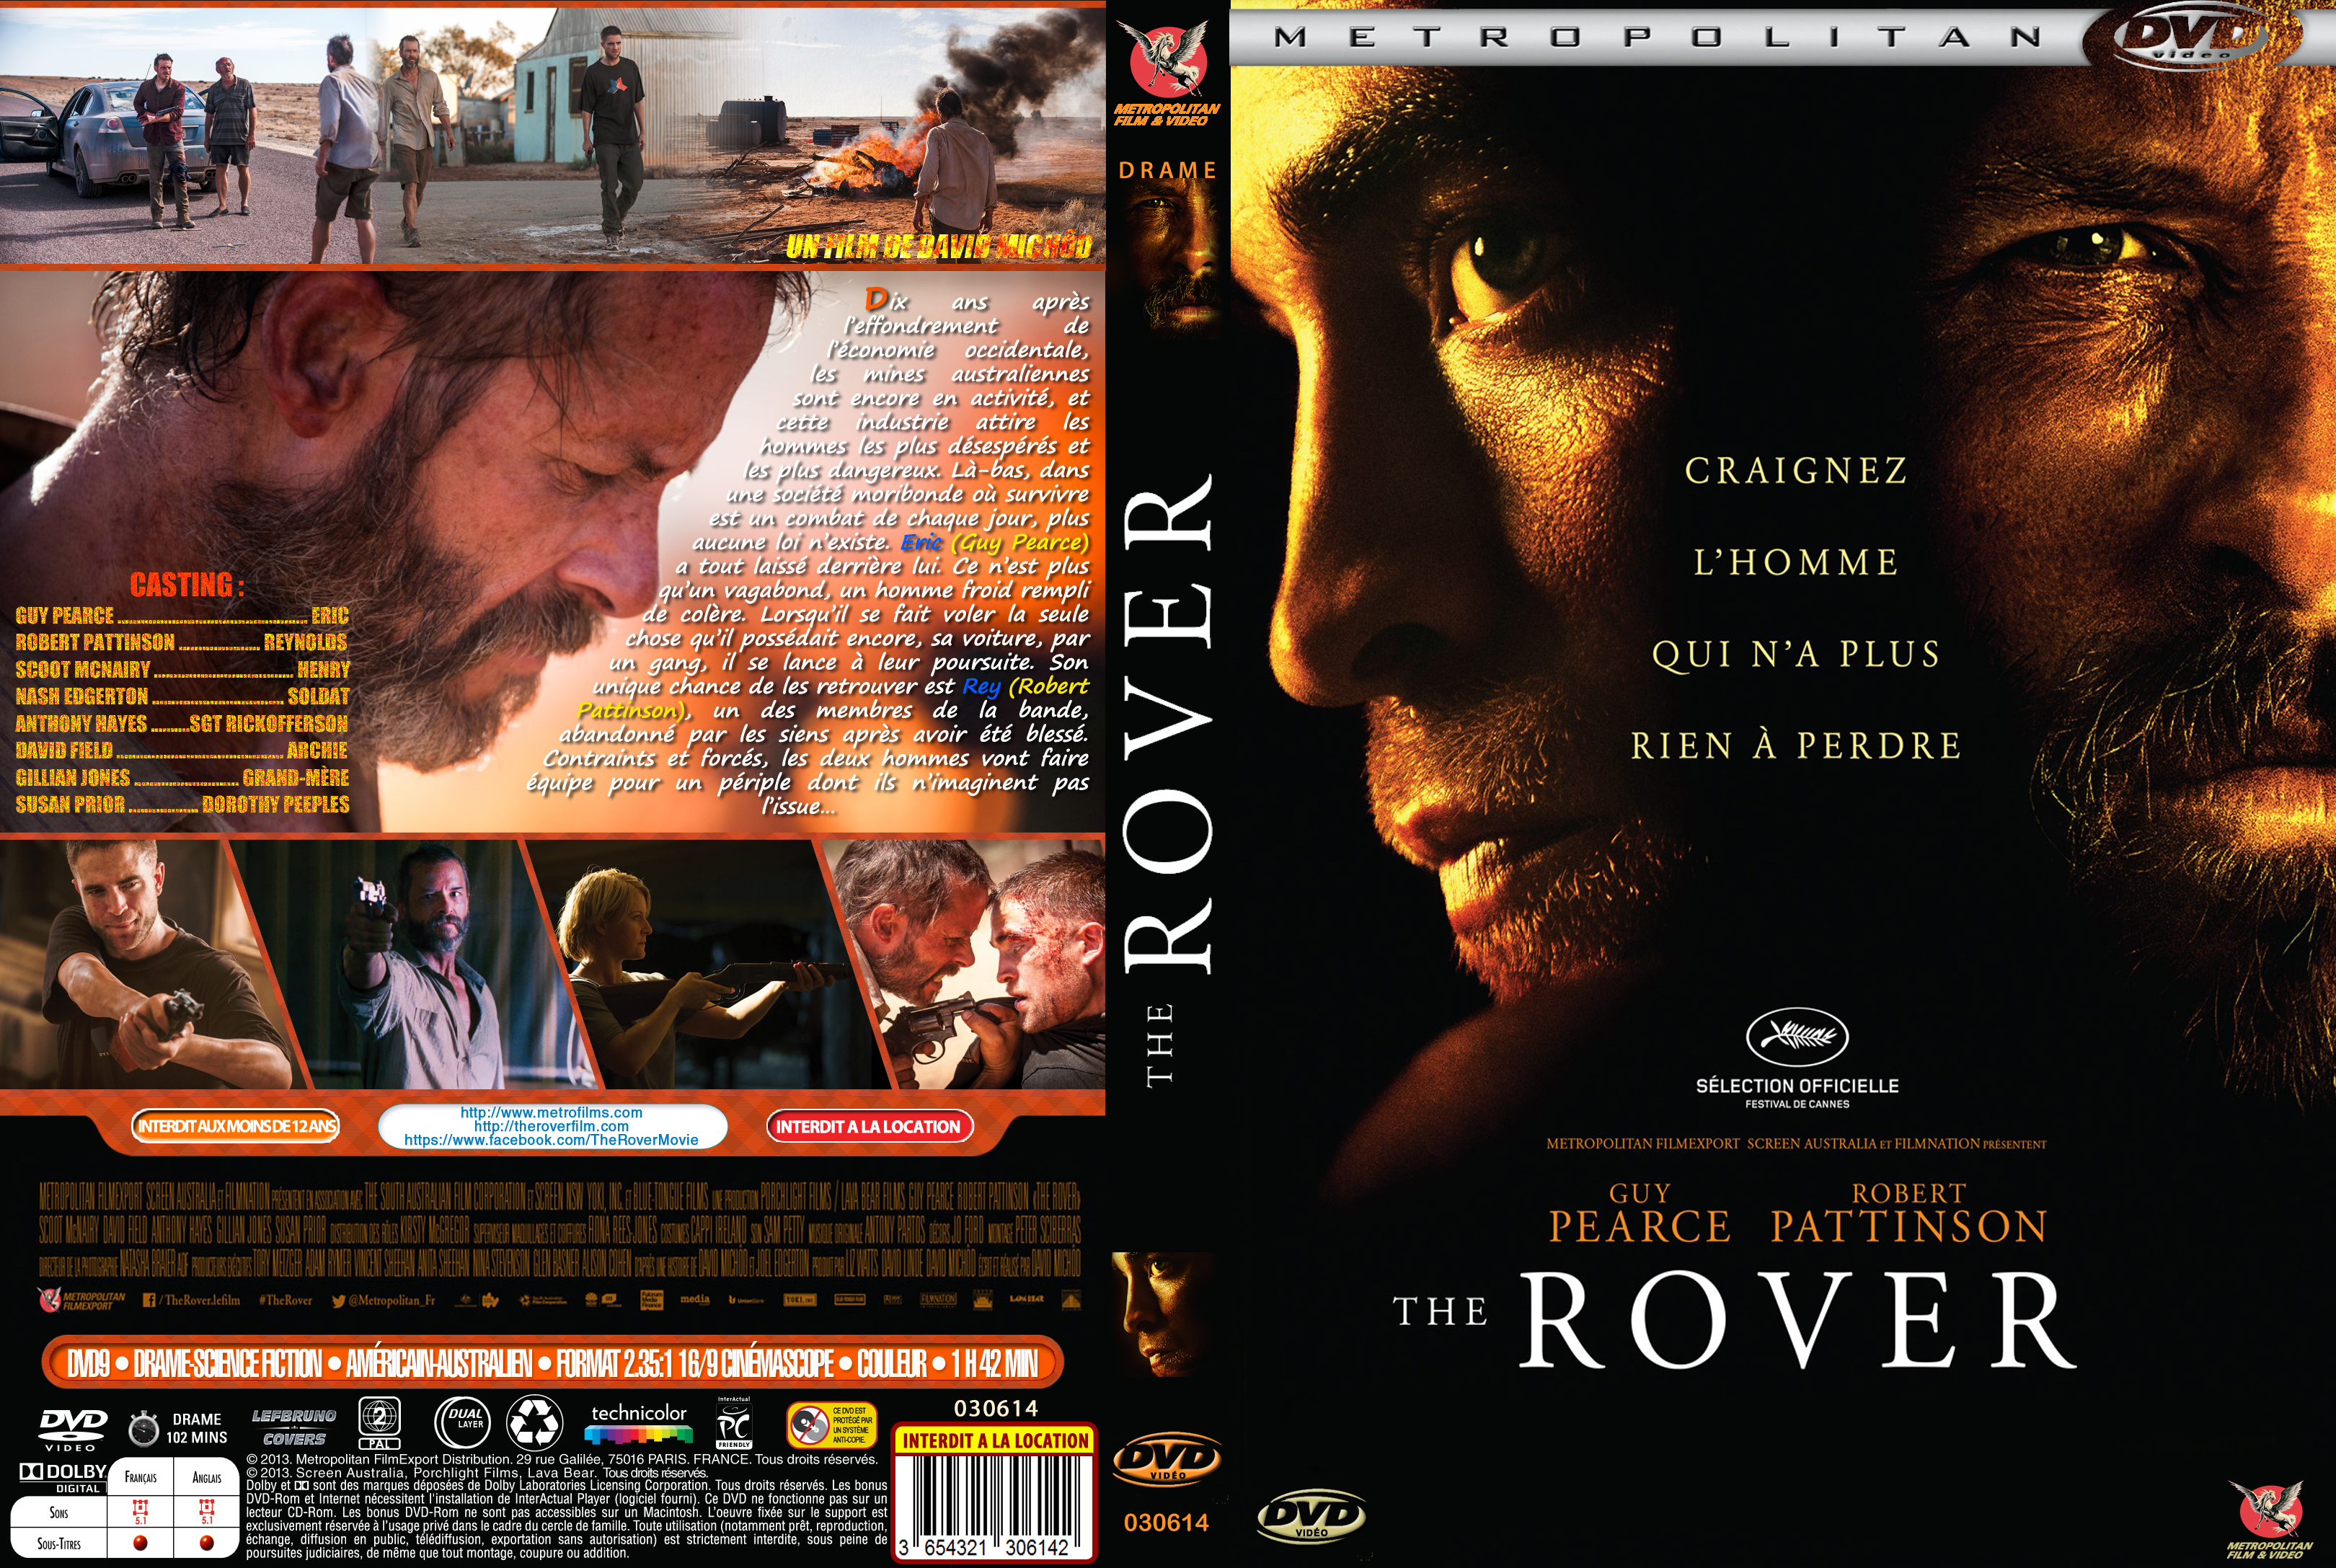 Jaquette DVD The Rover custom